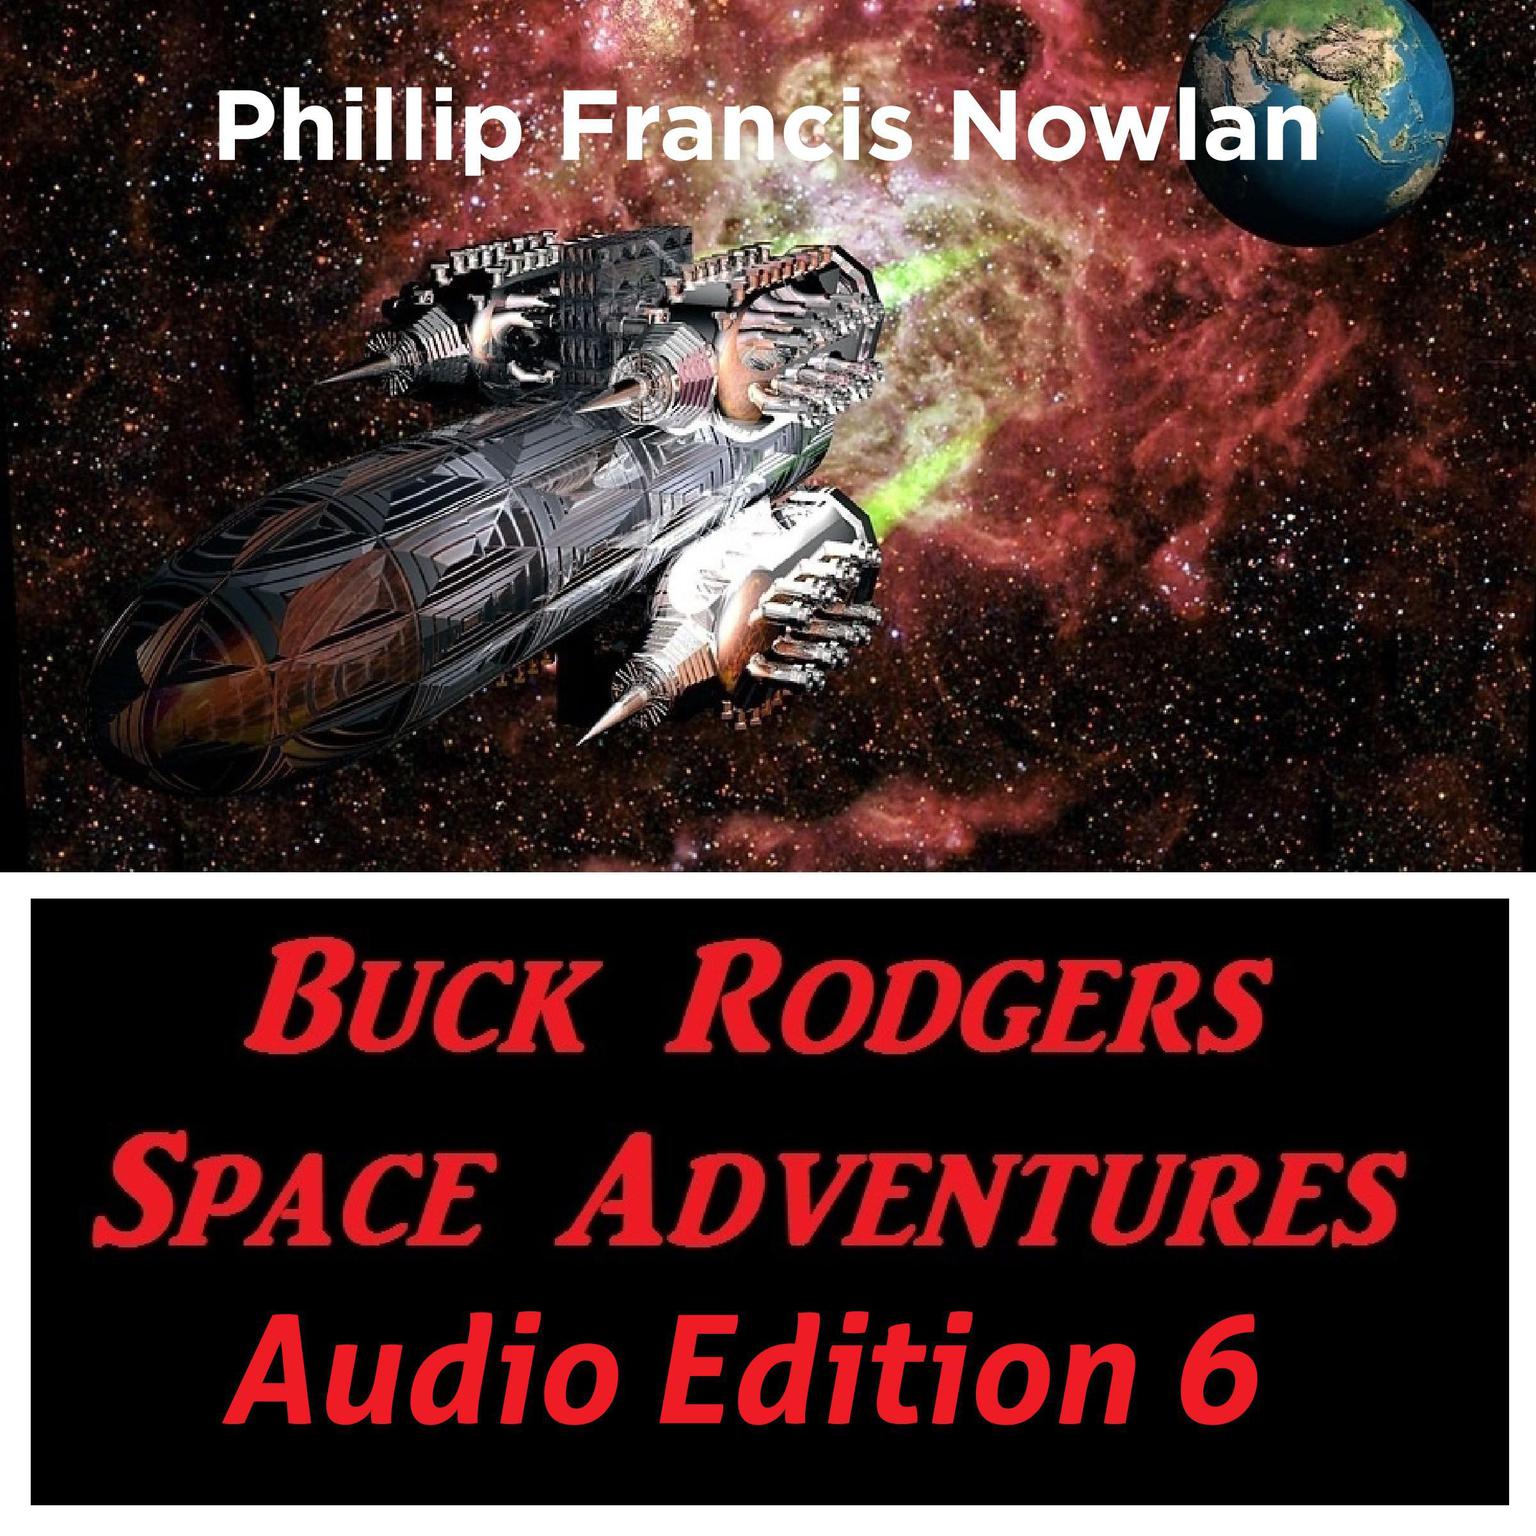 Buck Rodgers Space Adventures Audio Edition 06 Audiobook, by Phillip Francis Nowlan